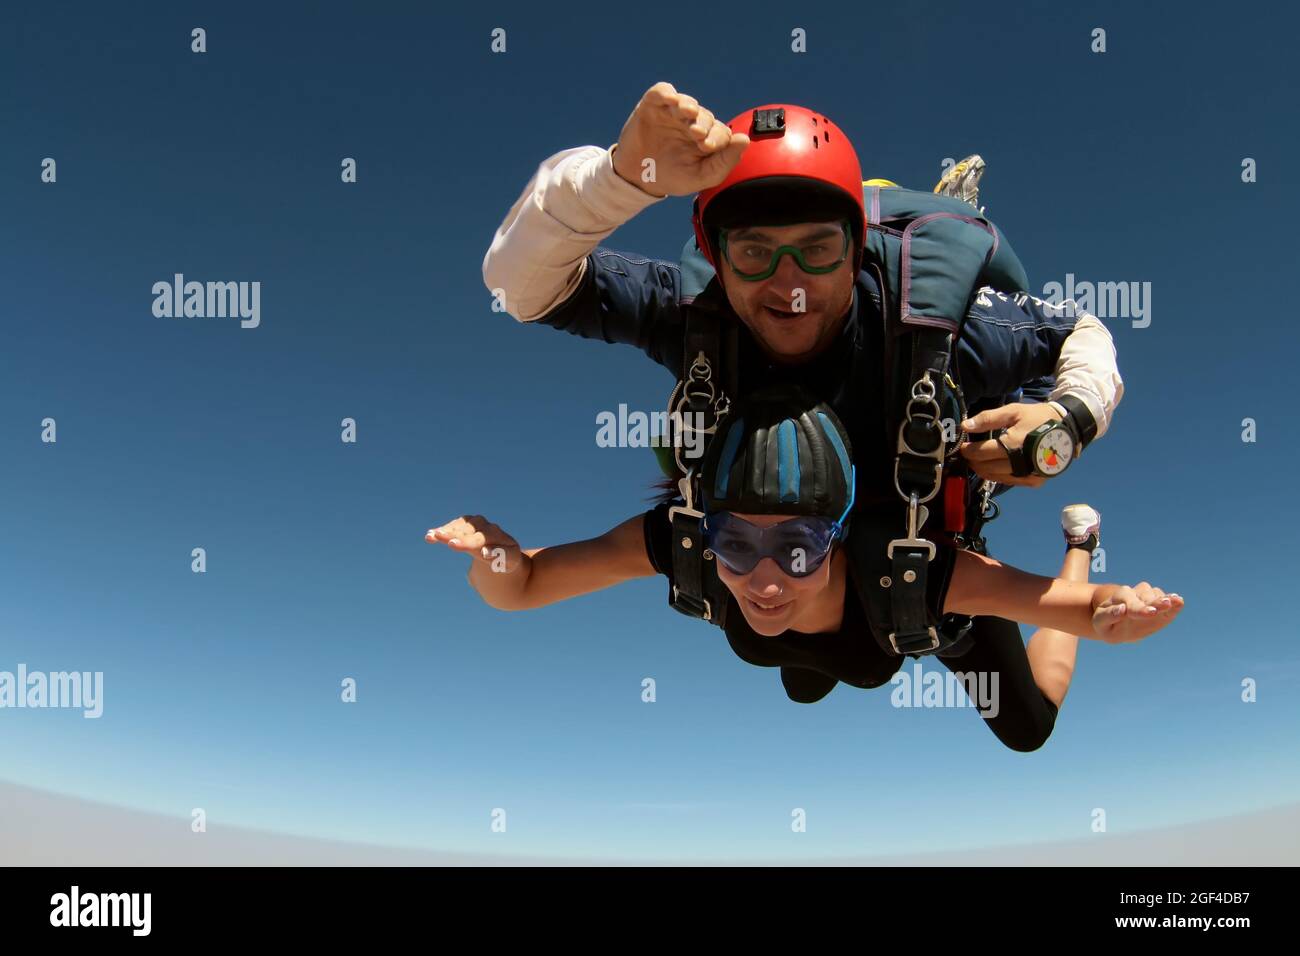 August 21, 2012. Toledo, Spain. An Instructor and a Female Student Jump Tandem Parachutes on a summer day in Spain. Stock Photo